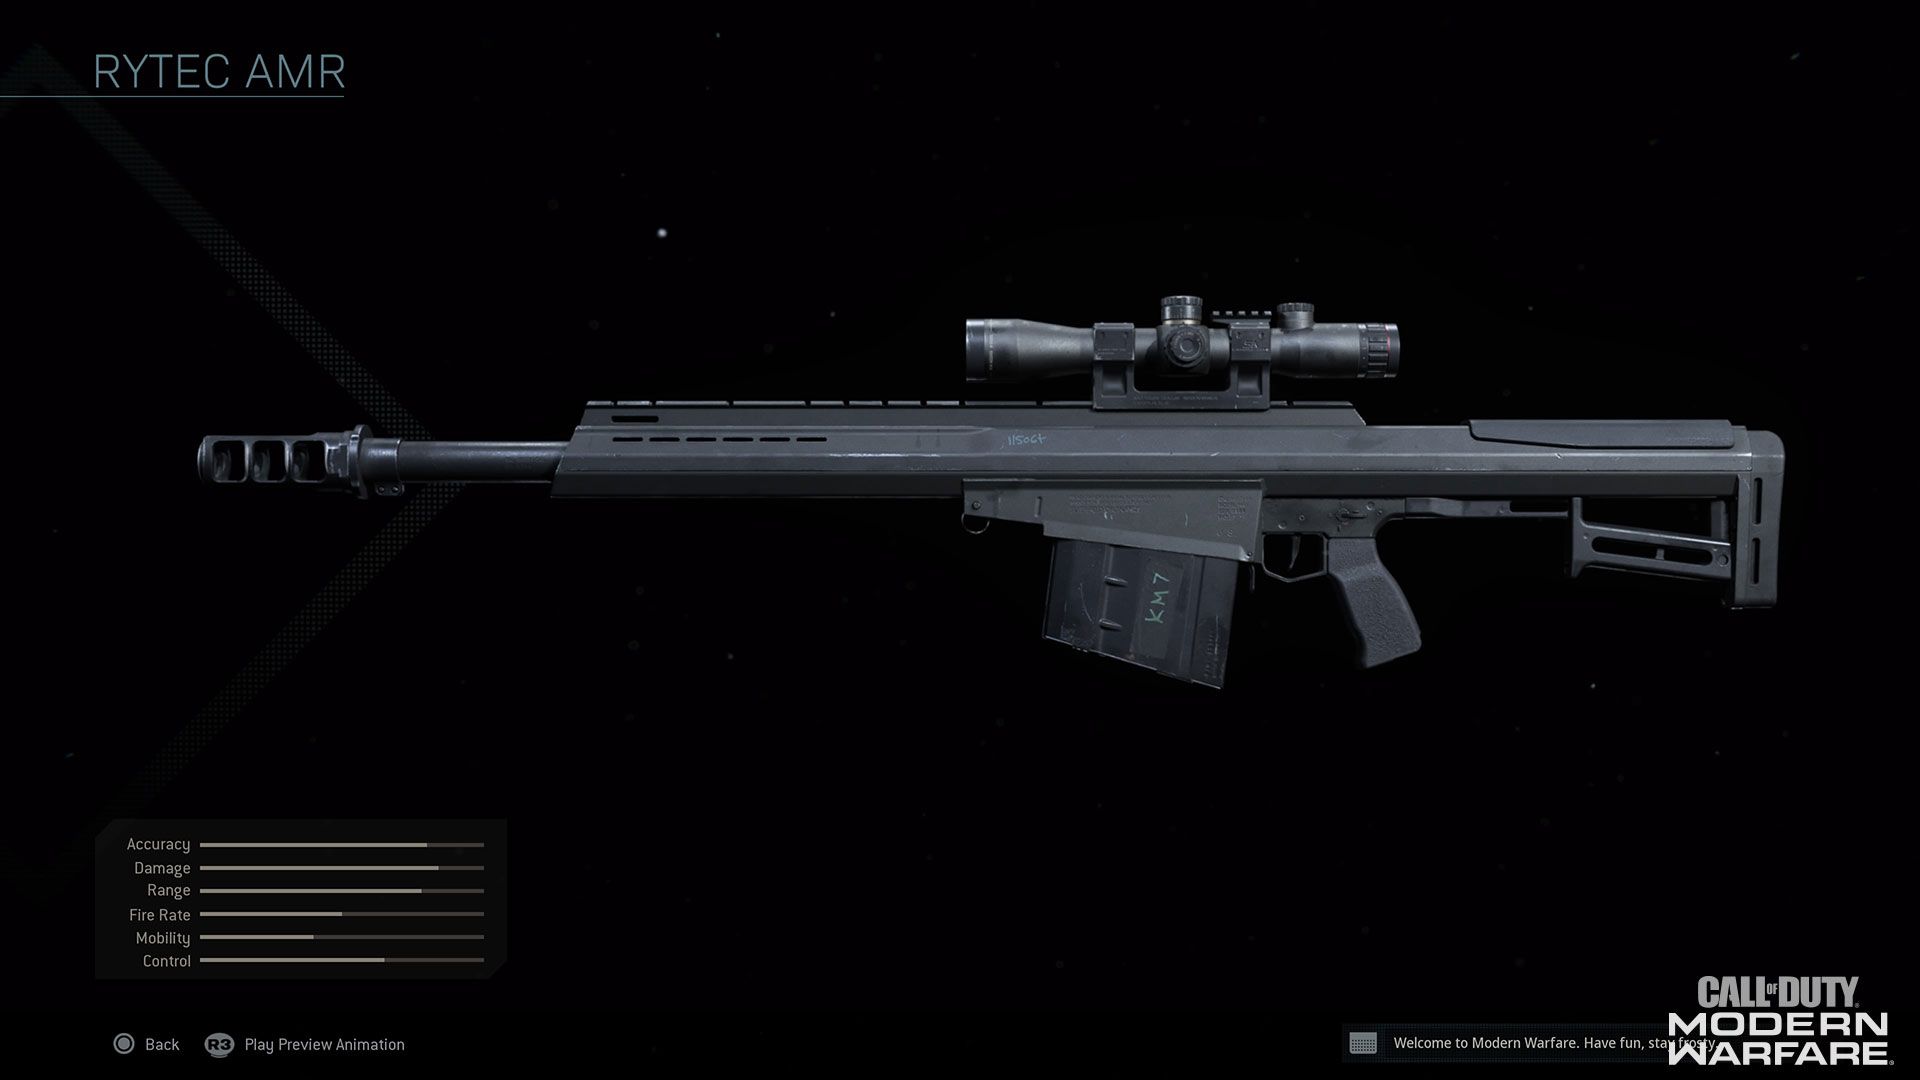 side view of rytec sniper rifle